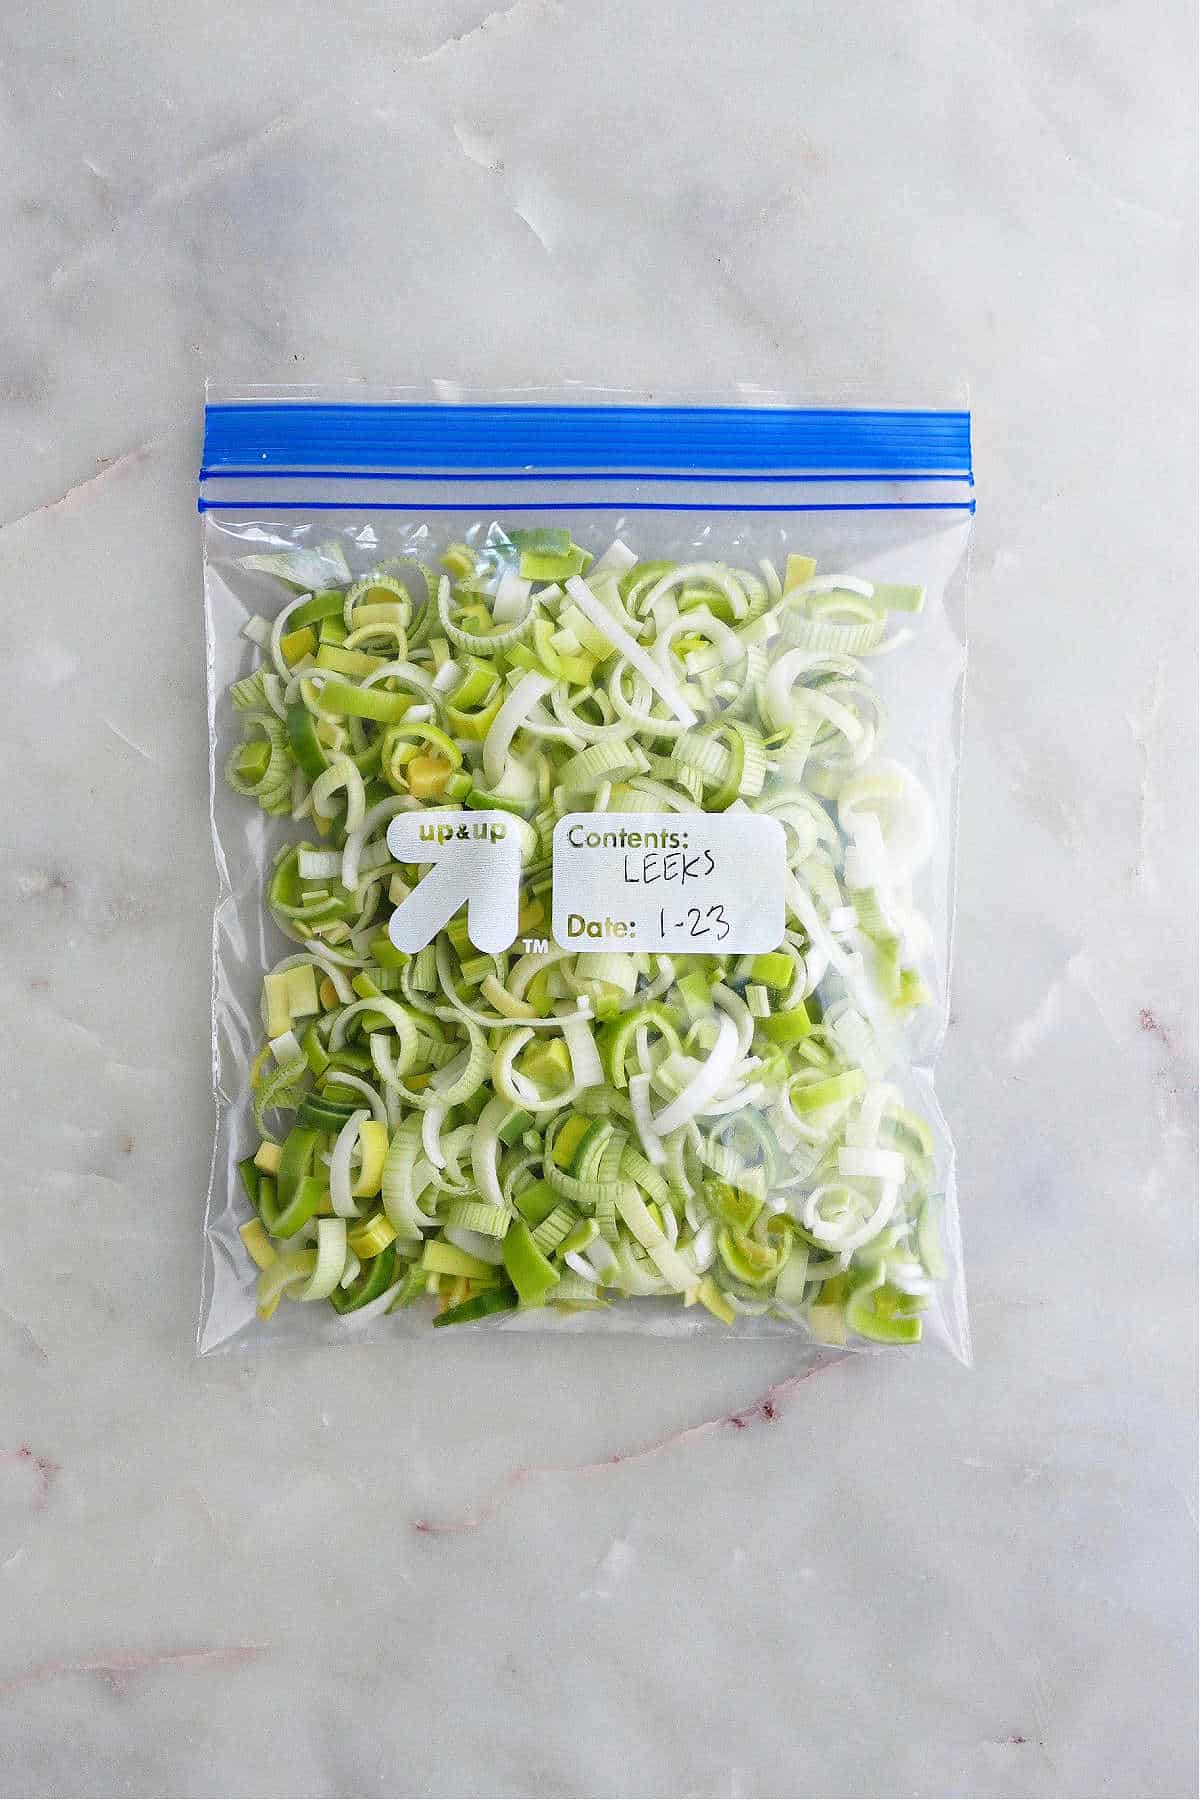 frozen leeks in a labeled, airtight freezer bag